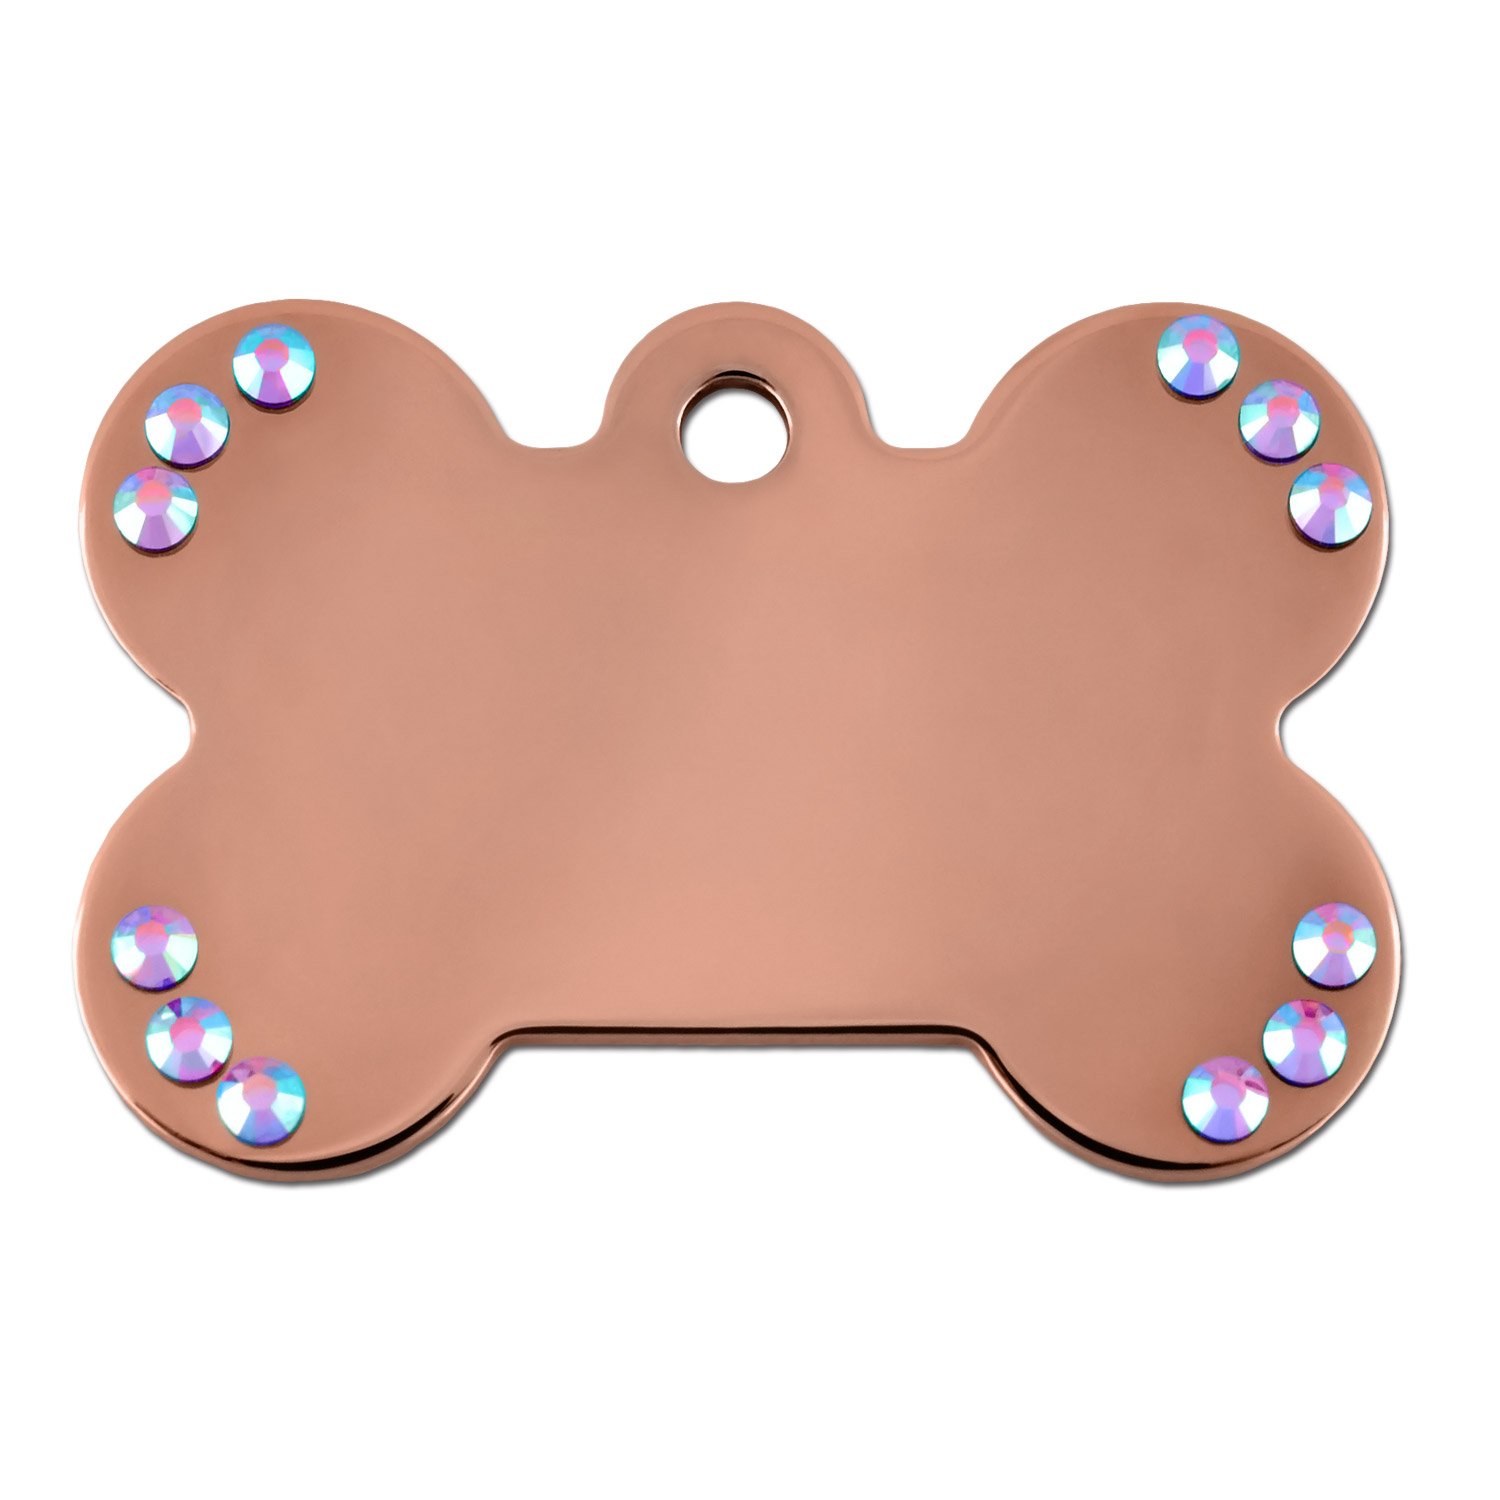 quick-tag-rose-gold-aurora-crystal-bone-personalized-engraved-pet-id